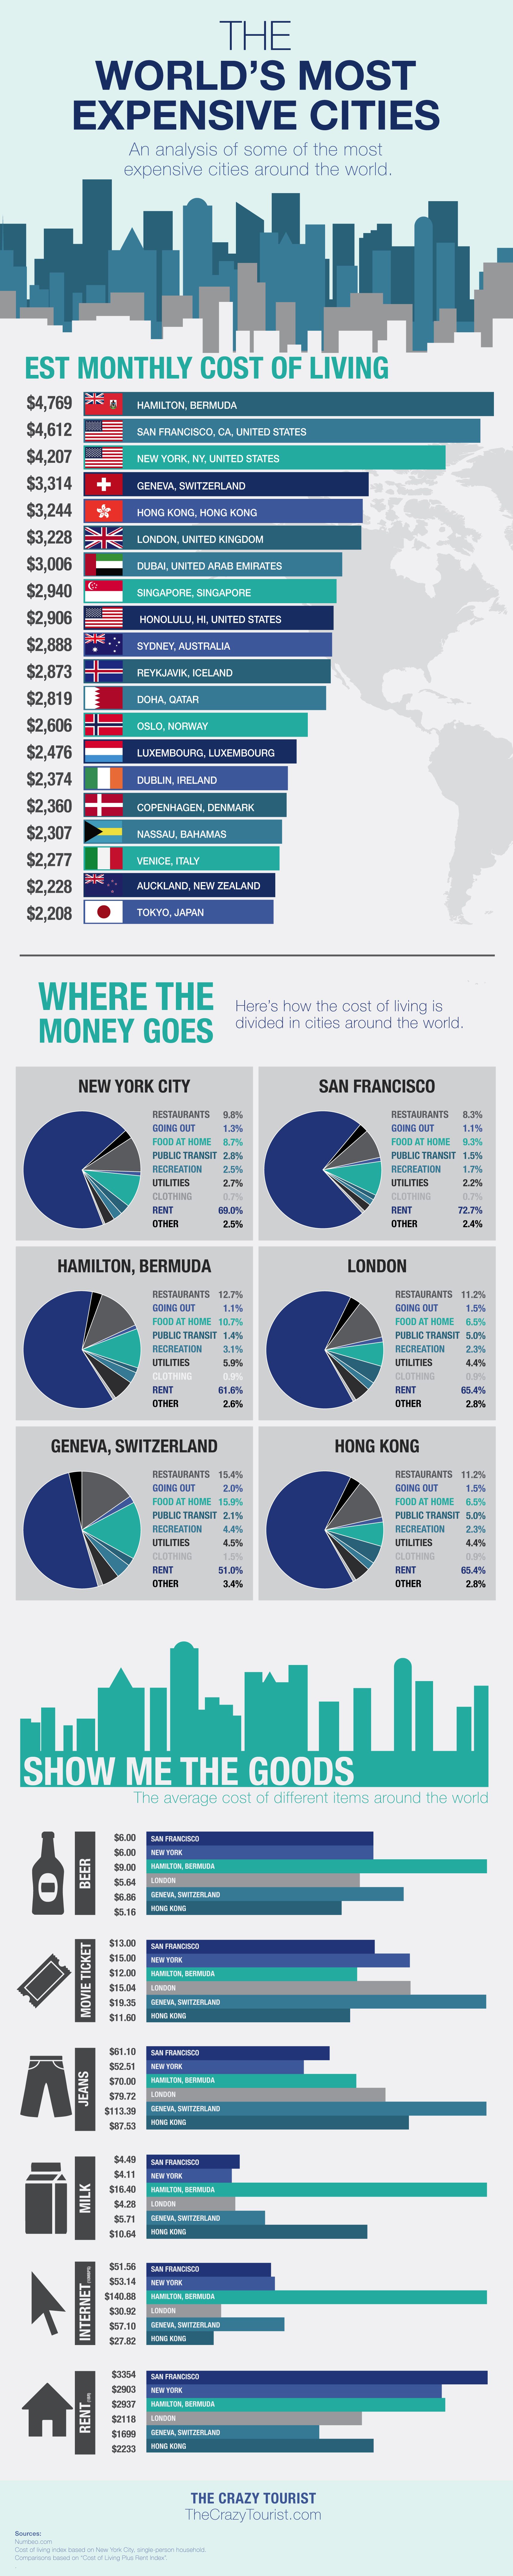 20 Of The Most Expensive Cities In The World [Infographic]